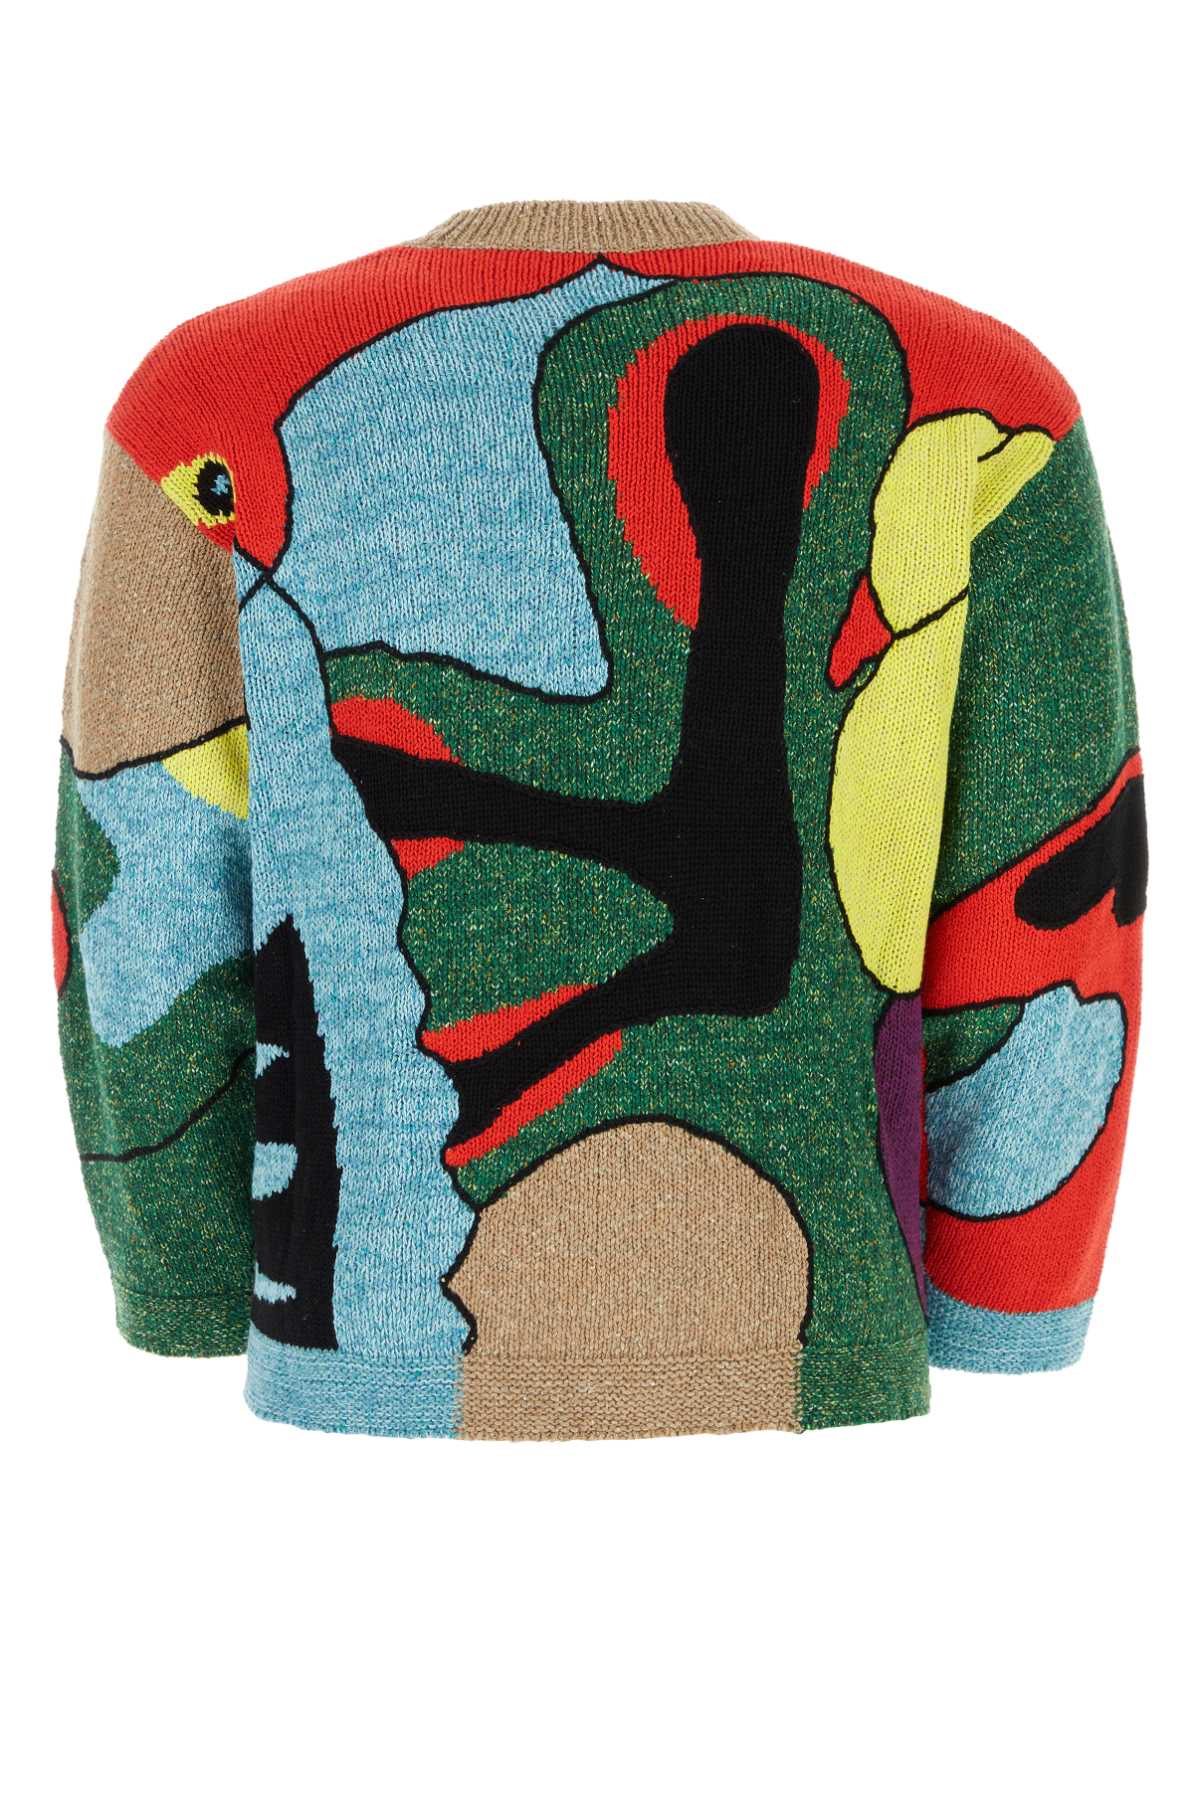 Kenzo Multicolor Cotton Blend Sweater In 83